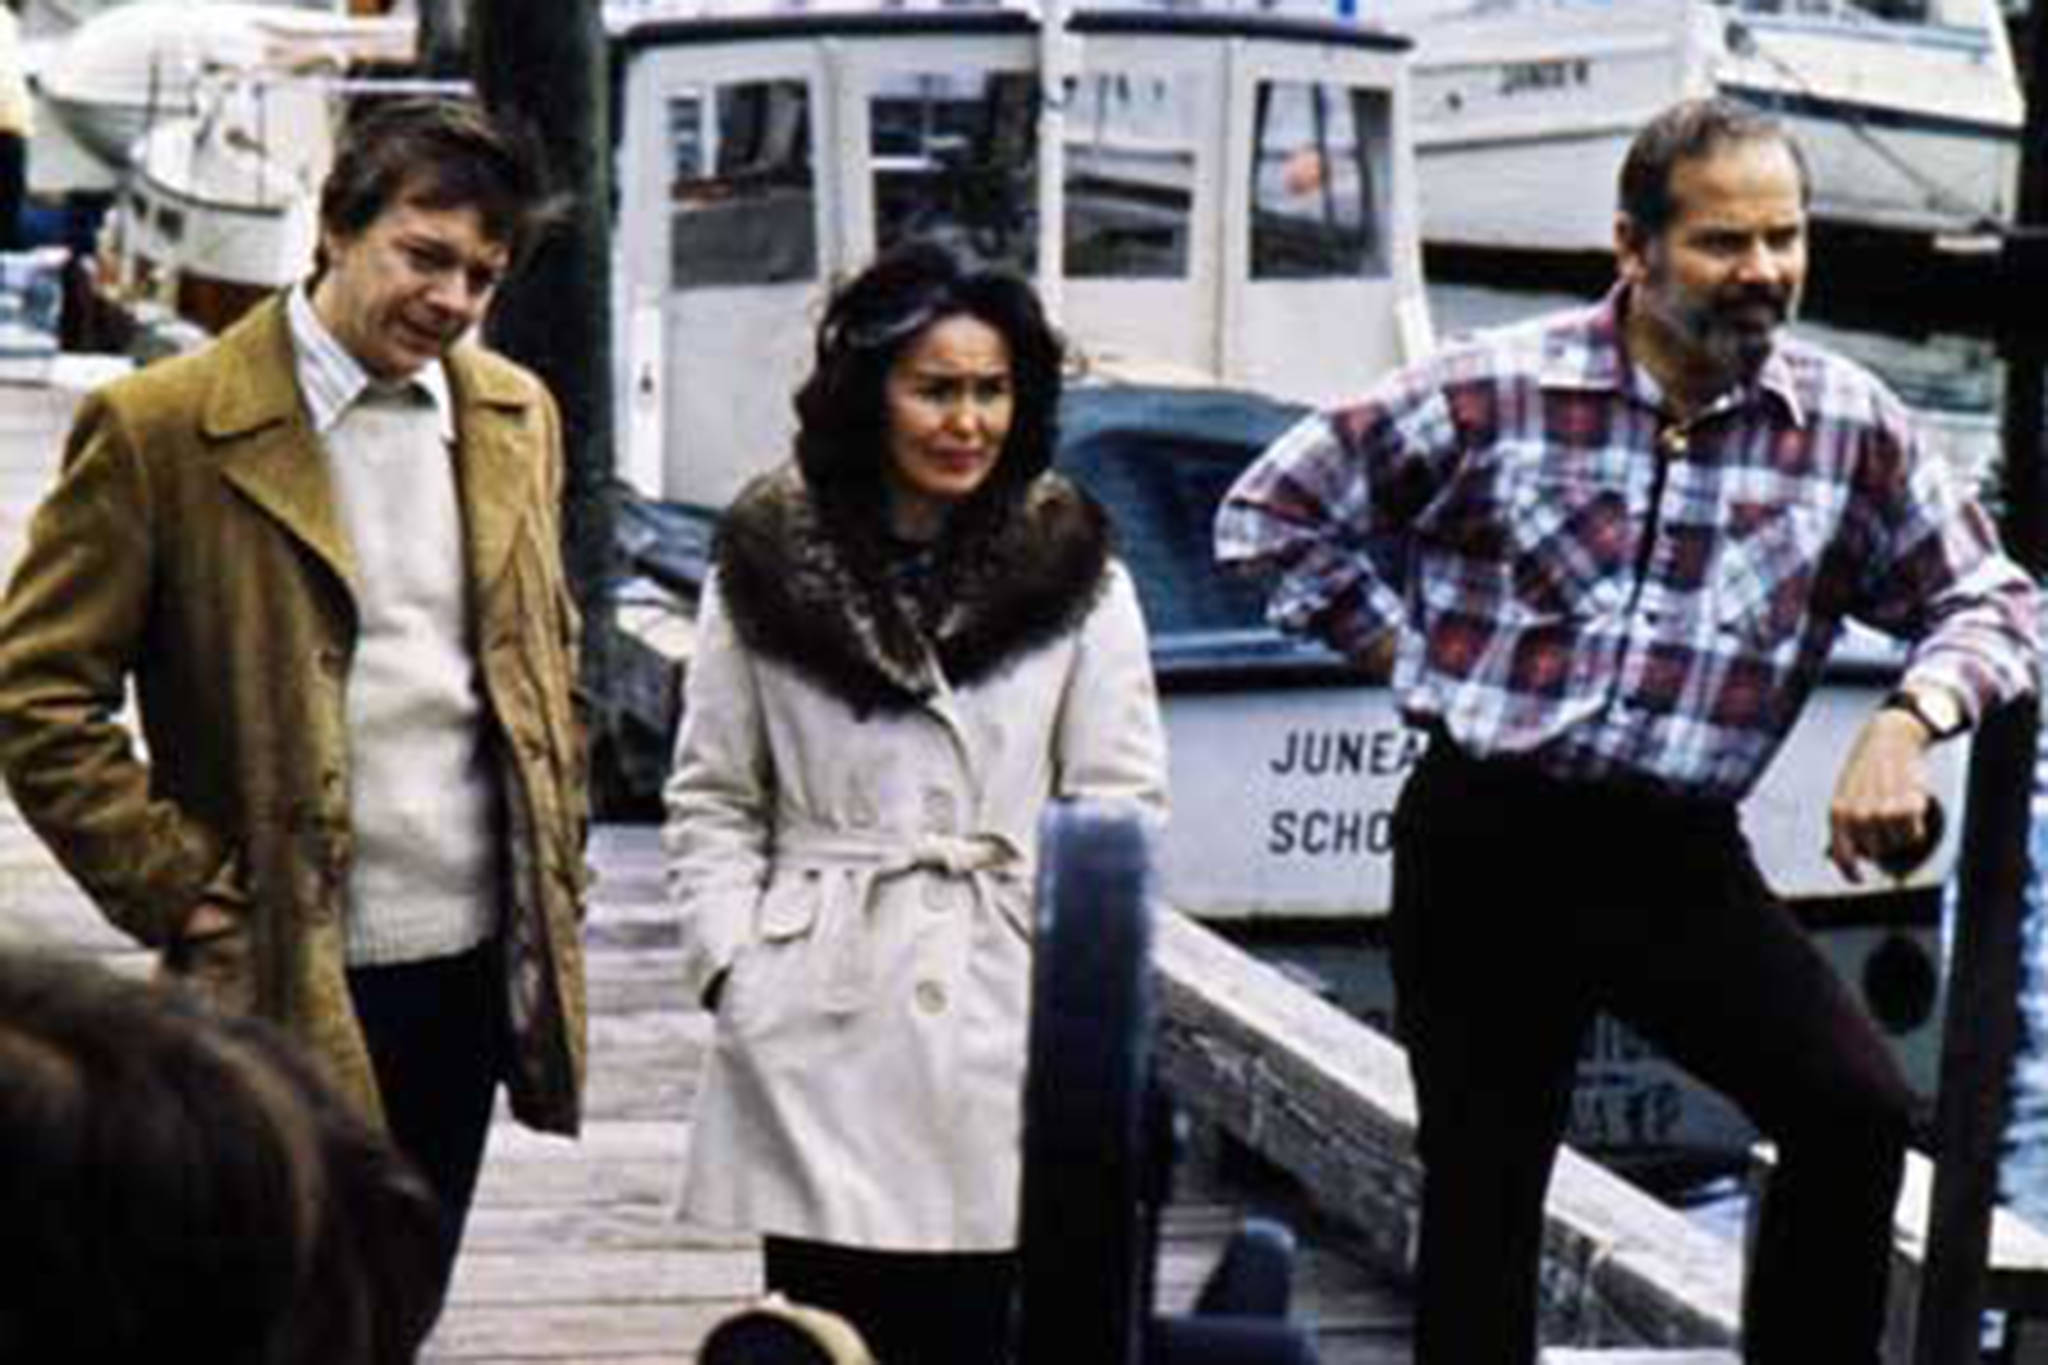 Jay and Bella Hammond and another, unidentified, person are interviewed on the dock at Juneau’s Harris Harbor. (Courtesy Photo | Alaska’s Digital Archives, Alaska Office of the Governor Photograph Collection, 1959 to present. ASL-PCA-213)